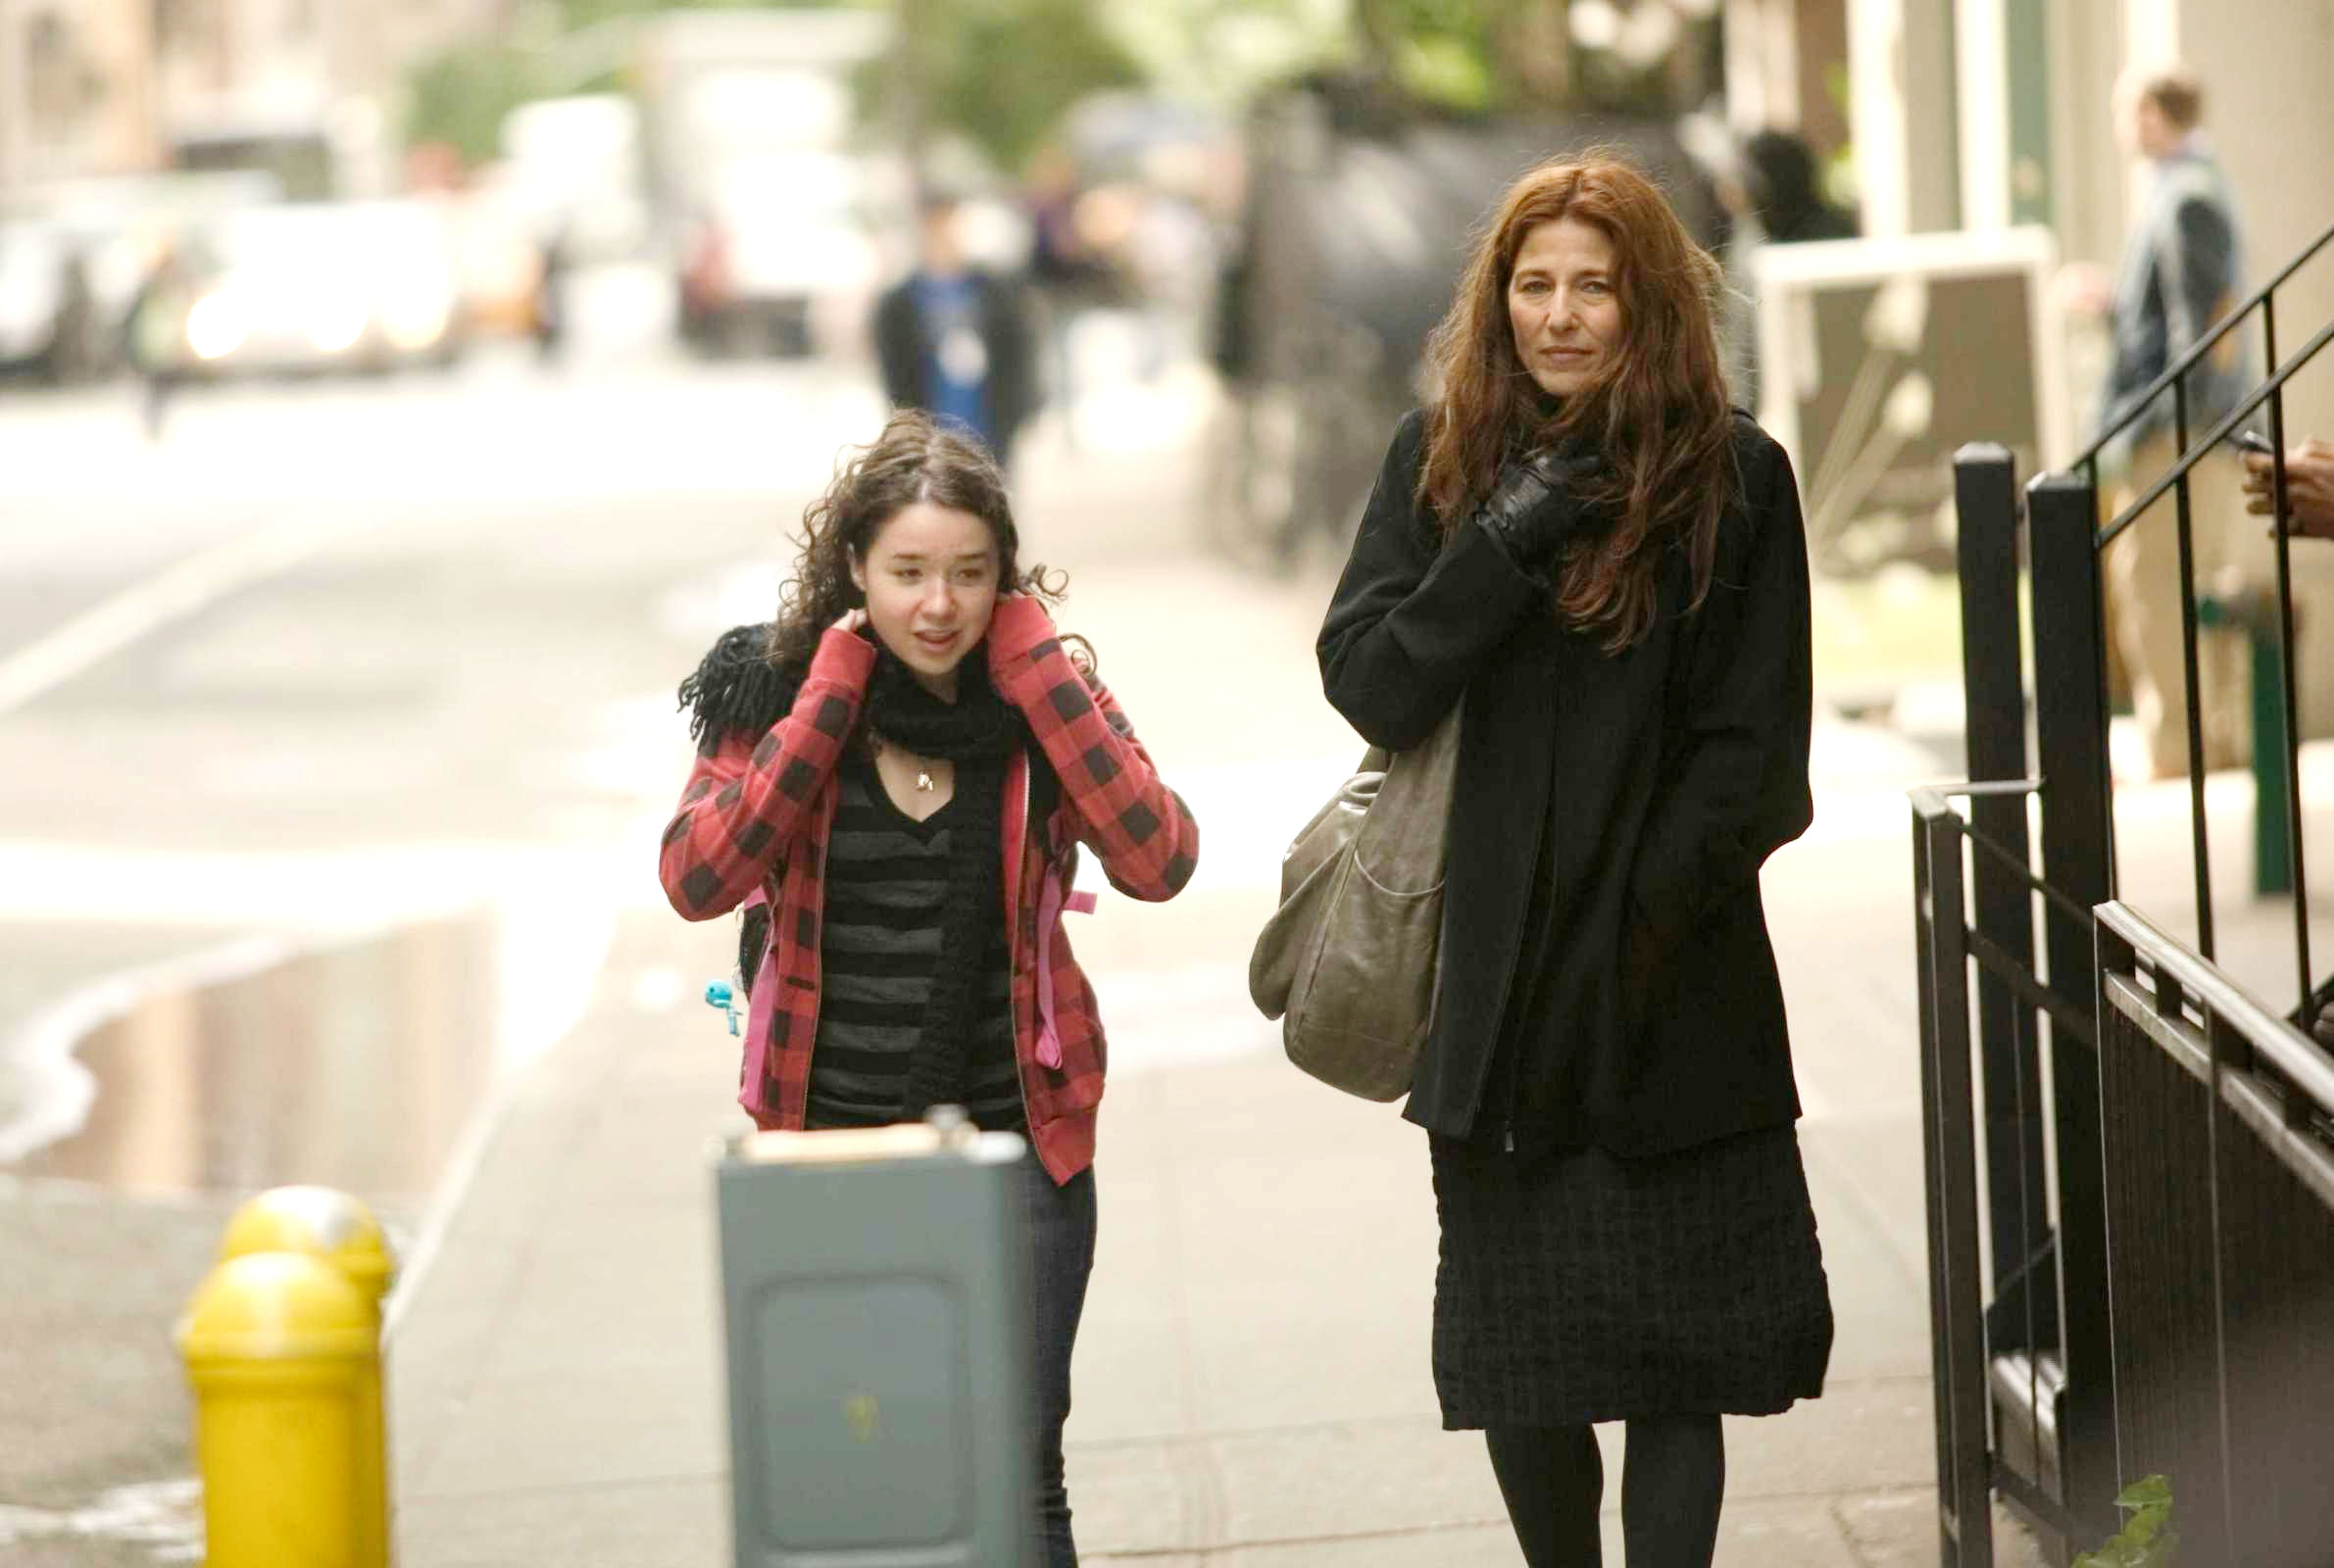 Sarah Steele stars as Abby and Catherine Keener stars as Kate in Sony Pictures Classics' Please Give (2010). Photo credit by Piotr Redlinksi.